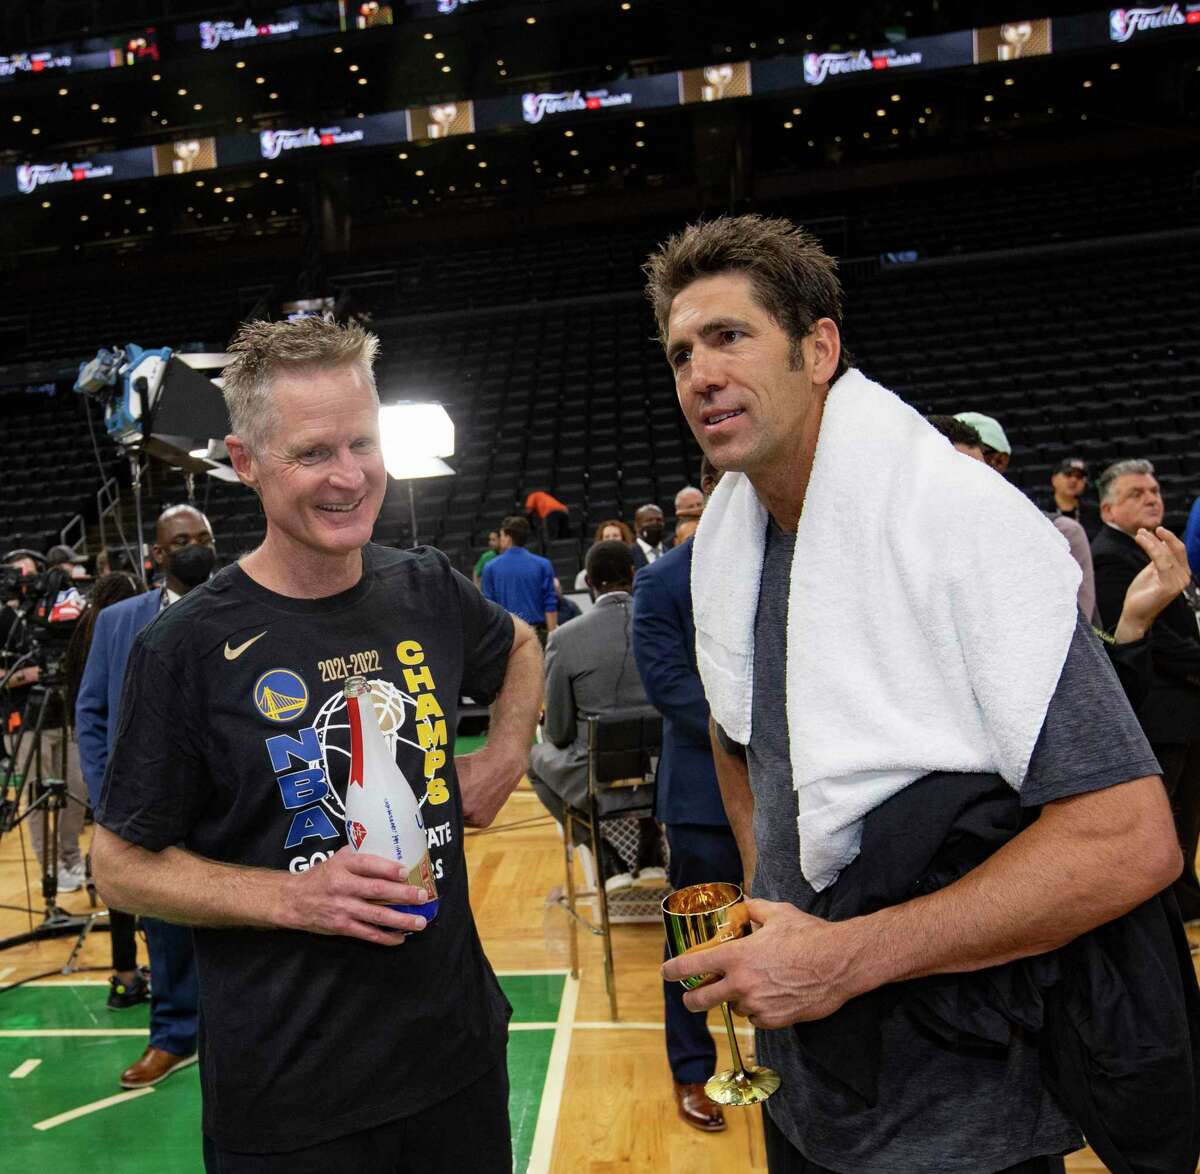 Golden State Warriors' Steve Kerr and Bob Myers celebrate after the Golden State Warriors defeated the Boston Celtics 103 to 90 in Game 6 to win the NBA Finals at TD Garden in Boston, Mass., on Thursday, June 16, 2022.